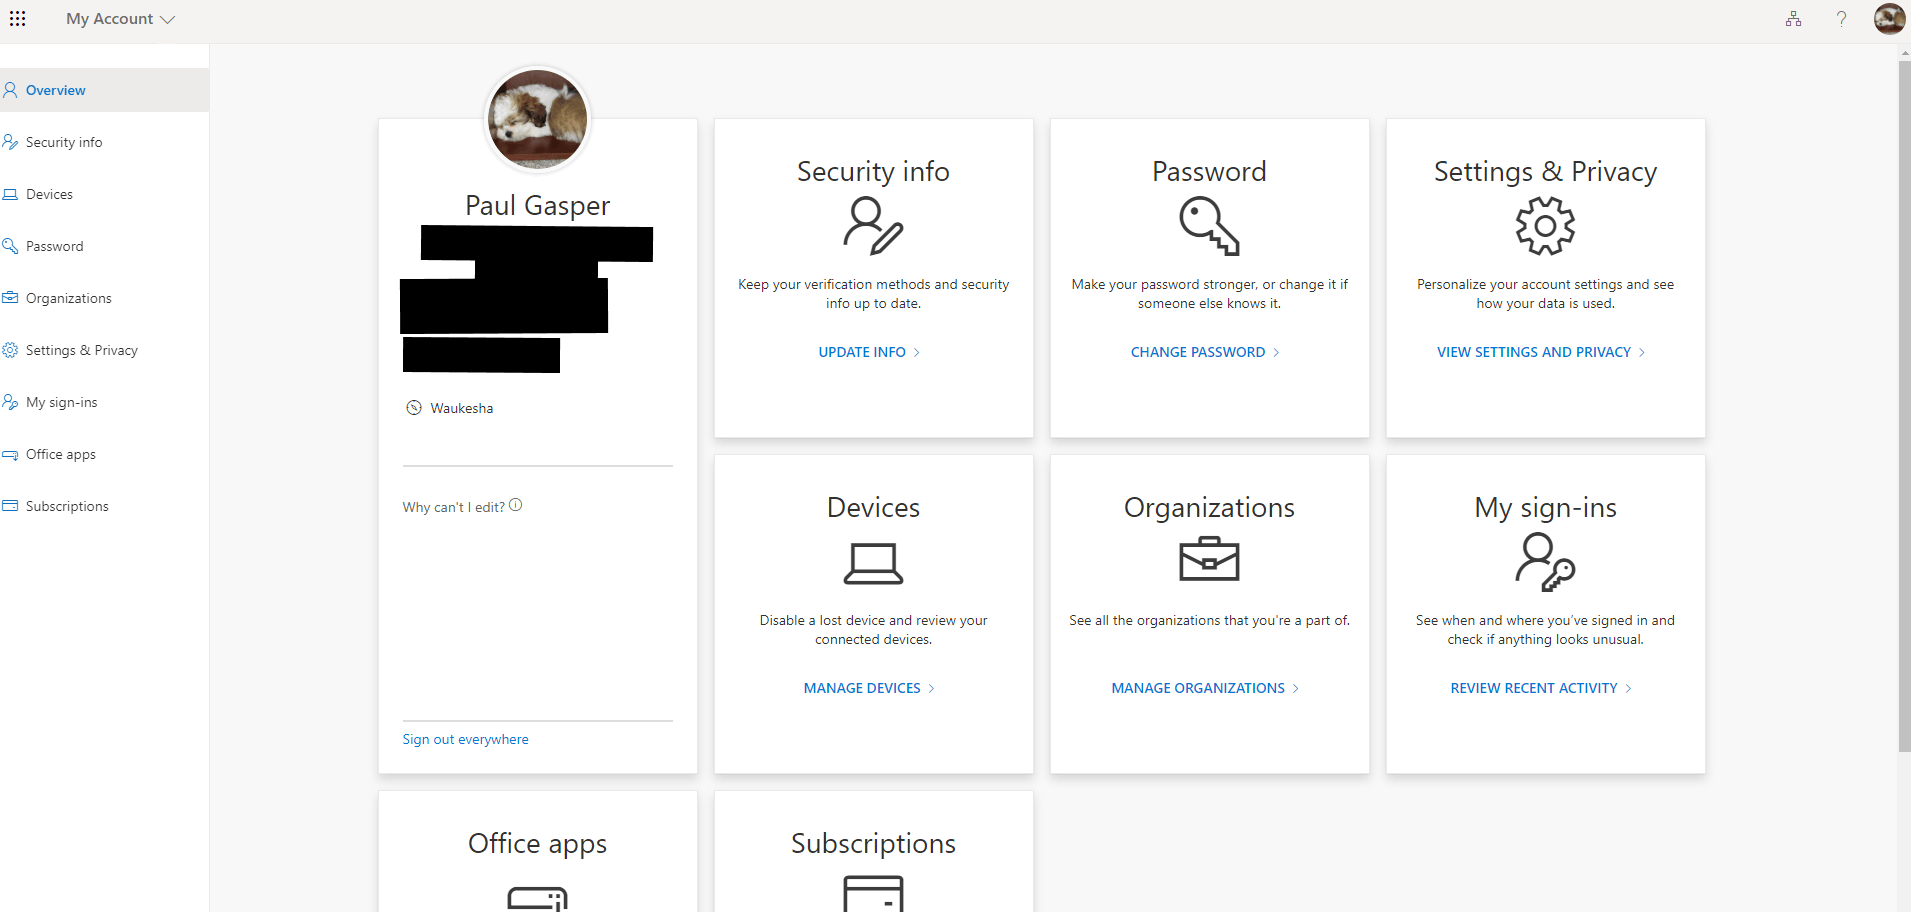 Change your profile photo - Microsoft Support